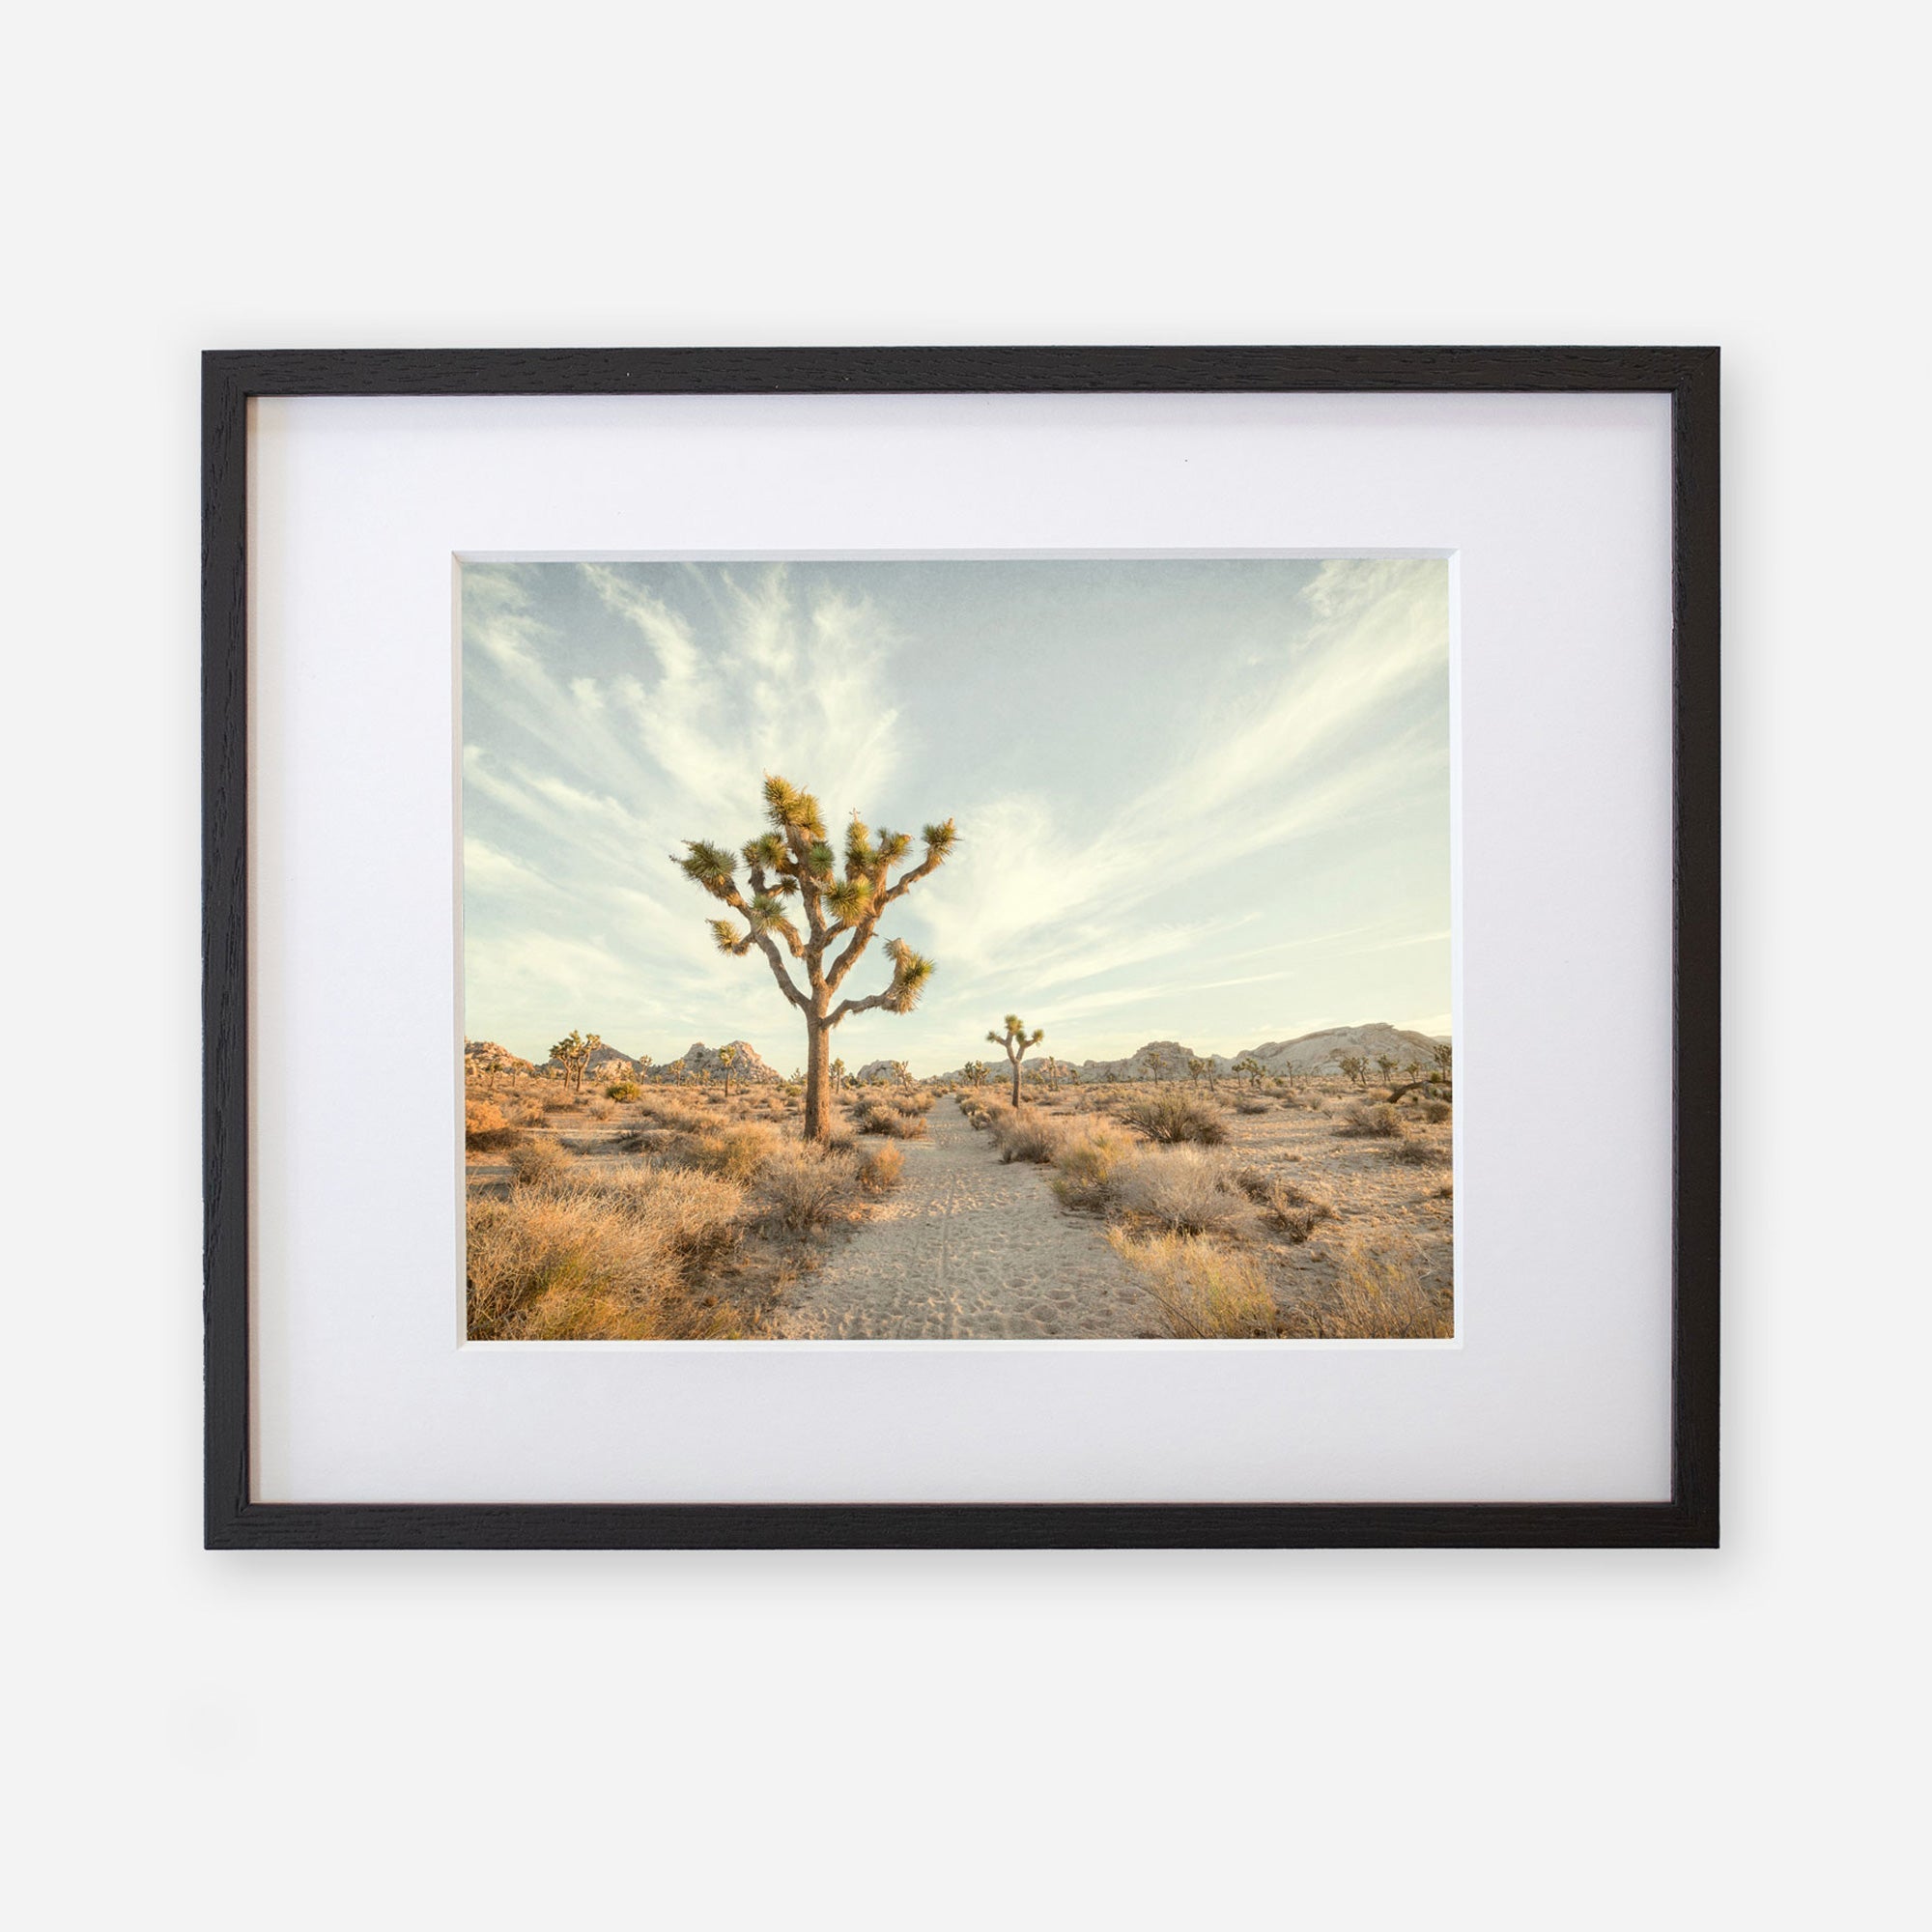 A framed photograph of a desert landscape in Joshua Tree, featuring a prominent joshua tree in the center, flanked by smaller trees and shrubs under a clear sky. - Offley Green&#39;s Joshua Tree Print, &#39;Path to Joshua&#39;